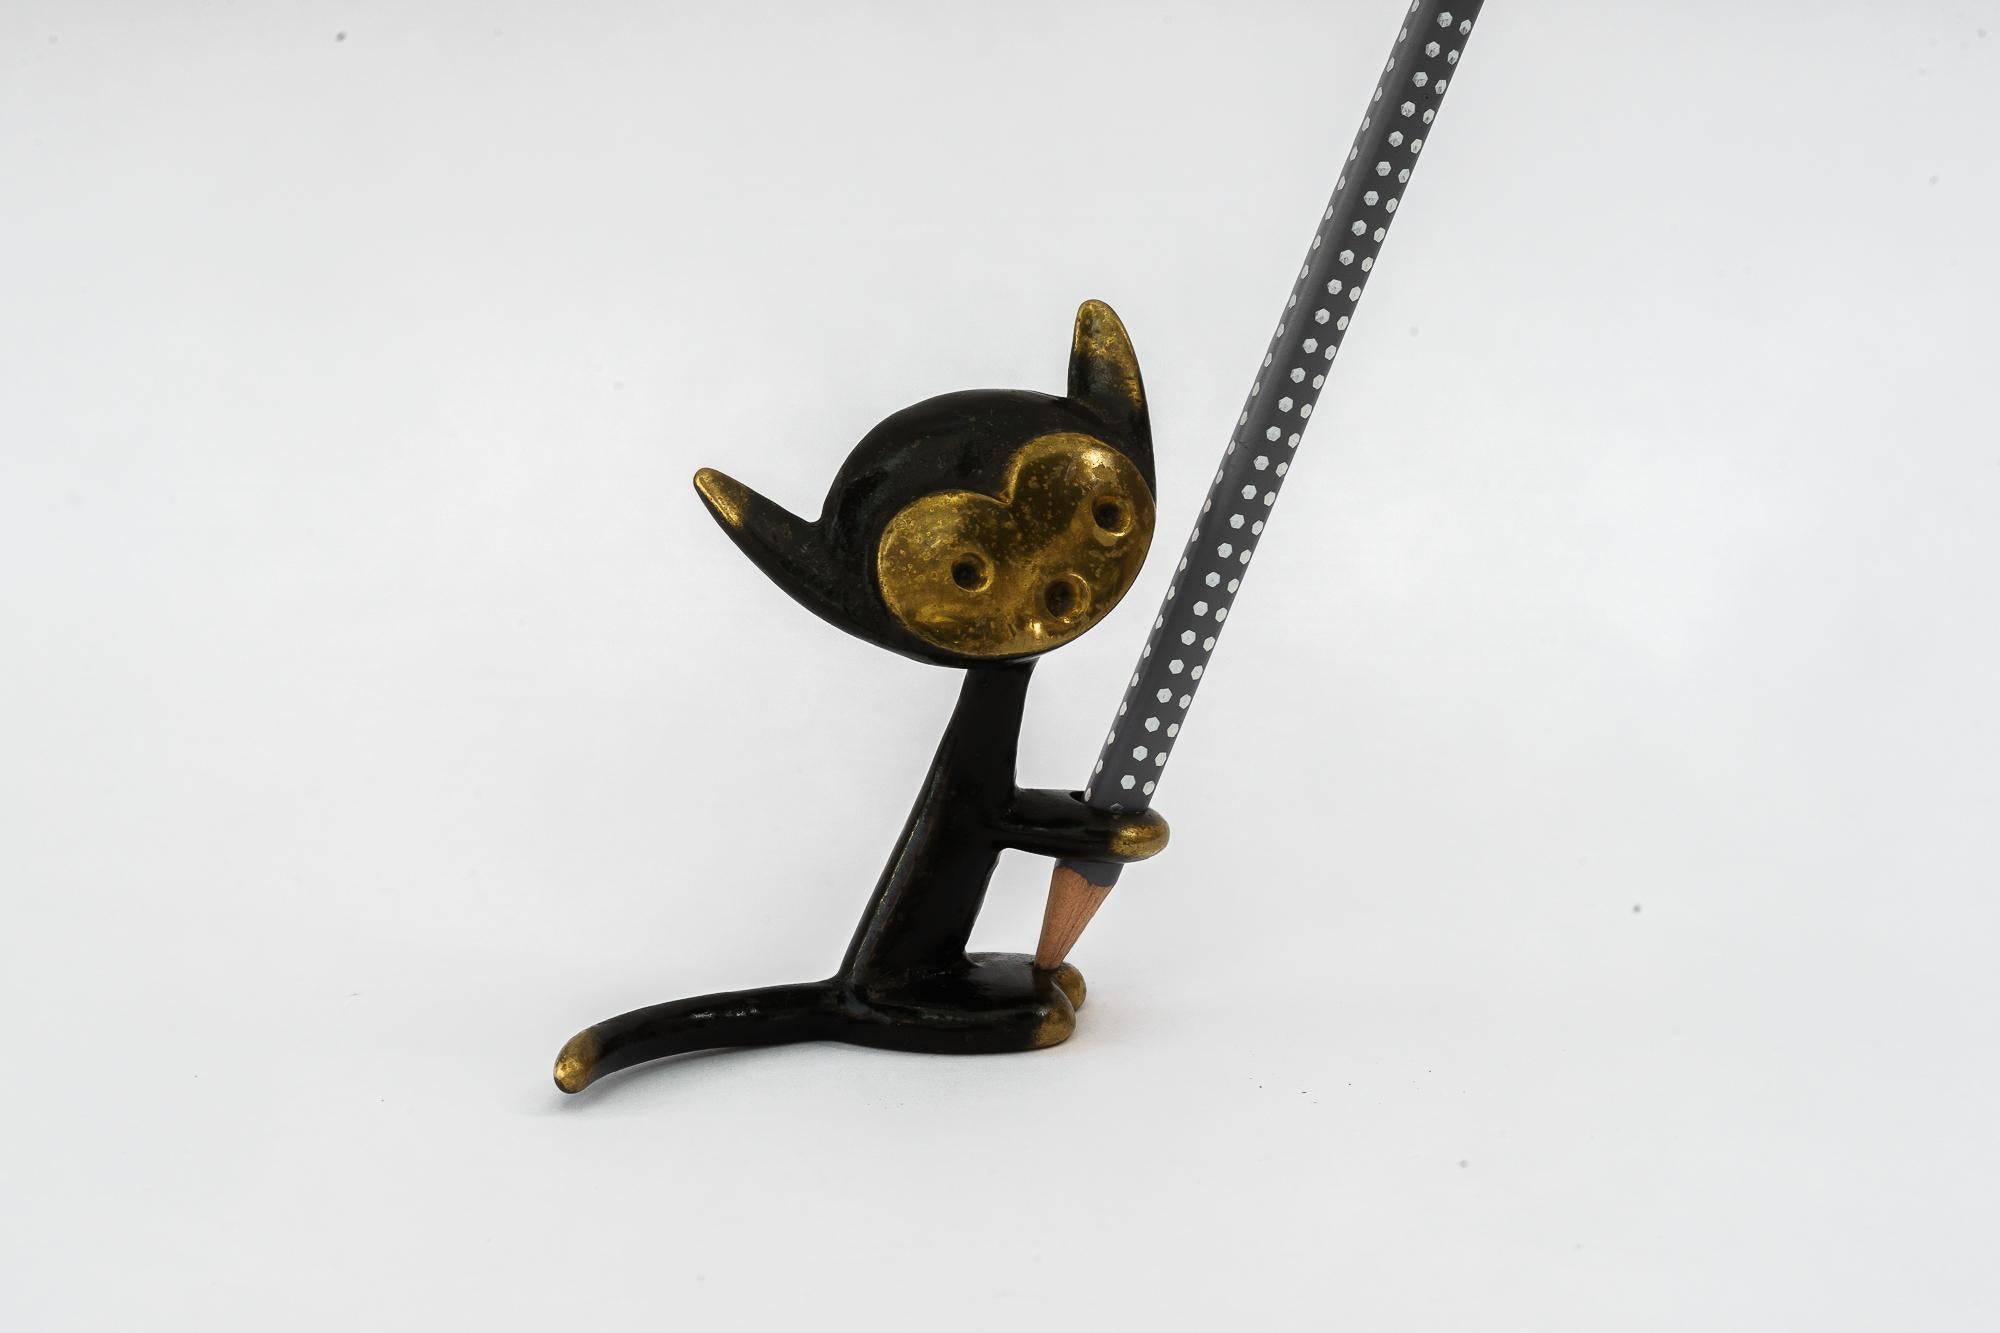 Pen holder by walter bosse shows a cat around 1950s
The pen is not for sale it is only for the photoshooting
Original condition